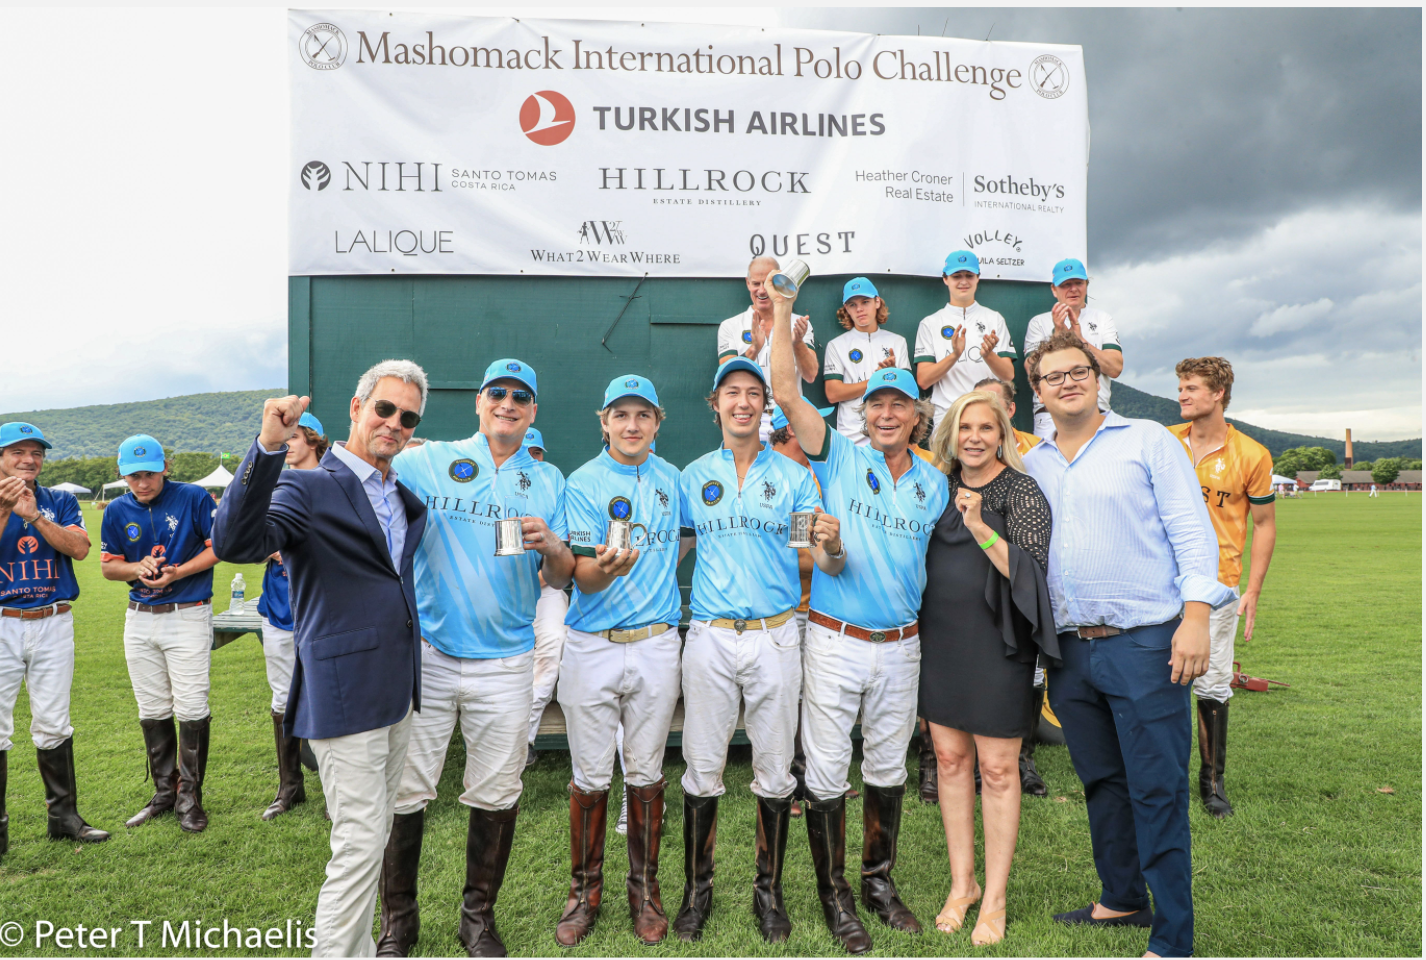 What to wear to 22 Mashomack International Polo Challenge ?  Karen Klopp and Hilary Dick chose the best fashion to celebrate the Polo Weekend in style. 